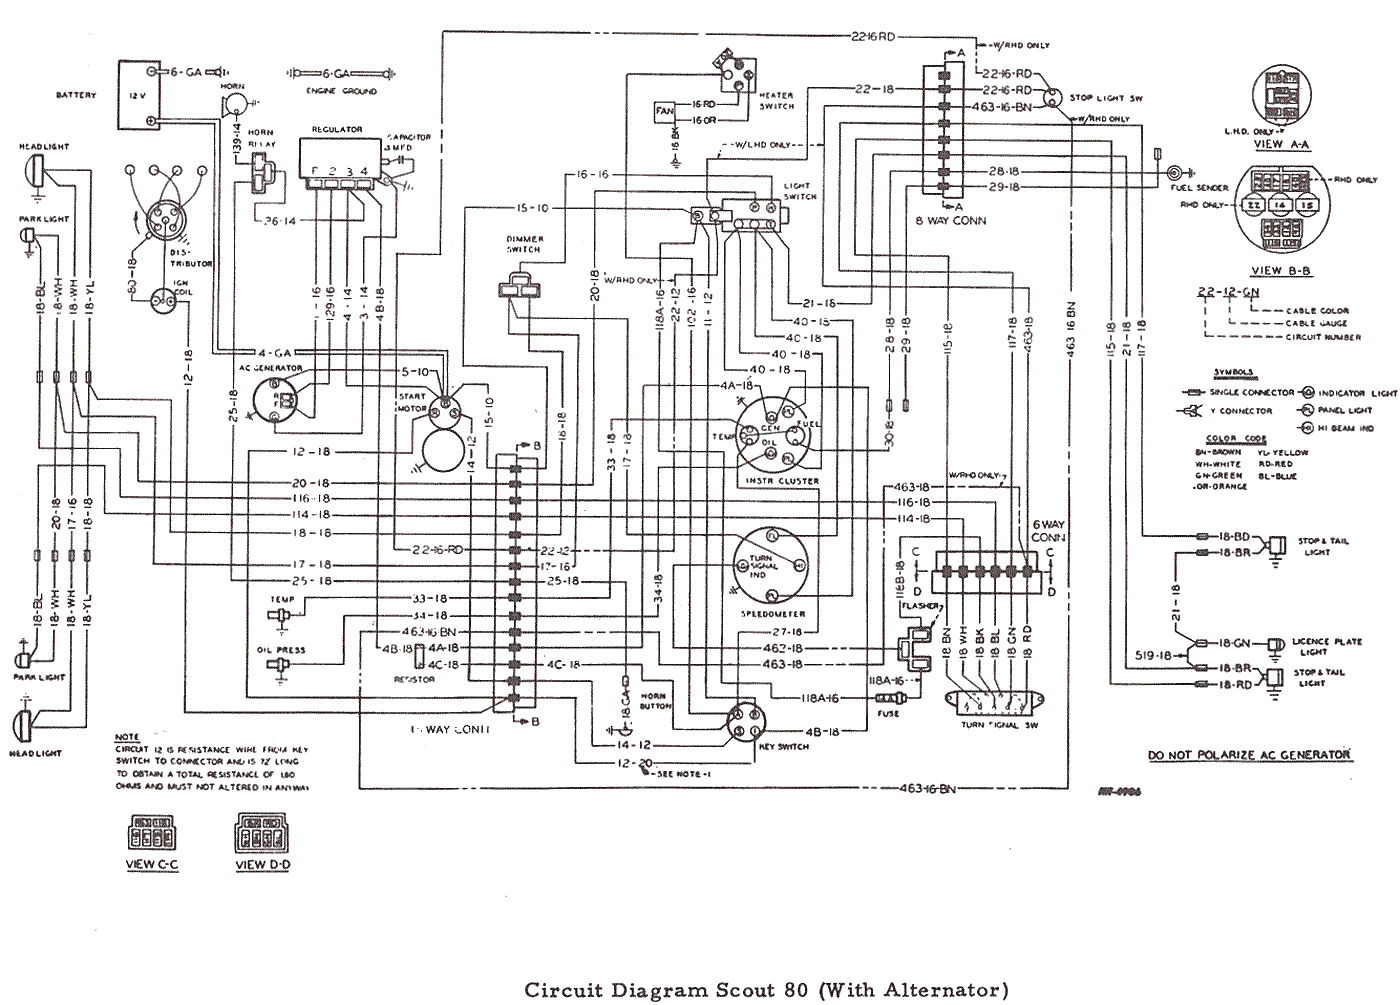 1965 scout engine wiring diagram wiring diagram pass front light wiring harness diagram19kb